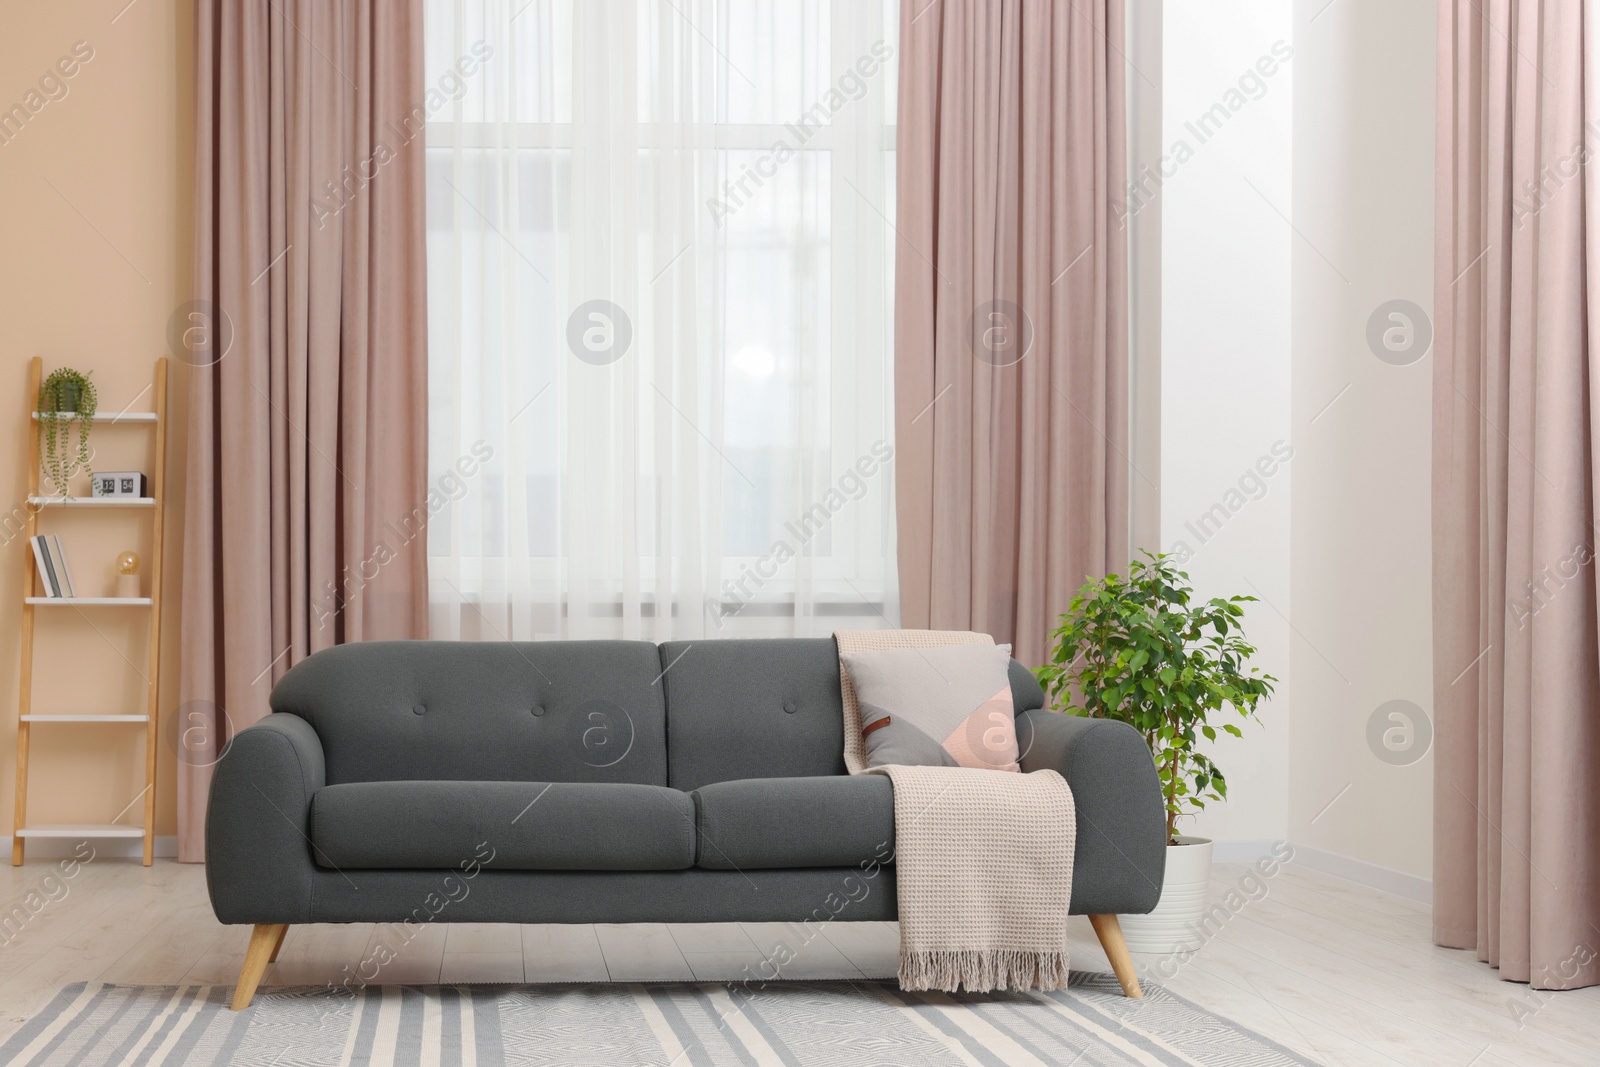 Photo of Stylish living room interior with cozy sofa, houseplant and elegant curtains